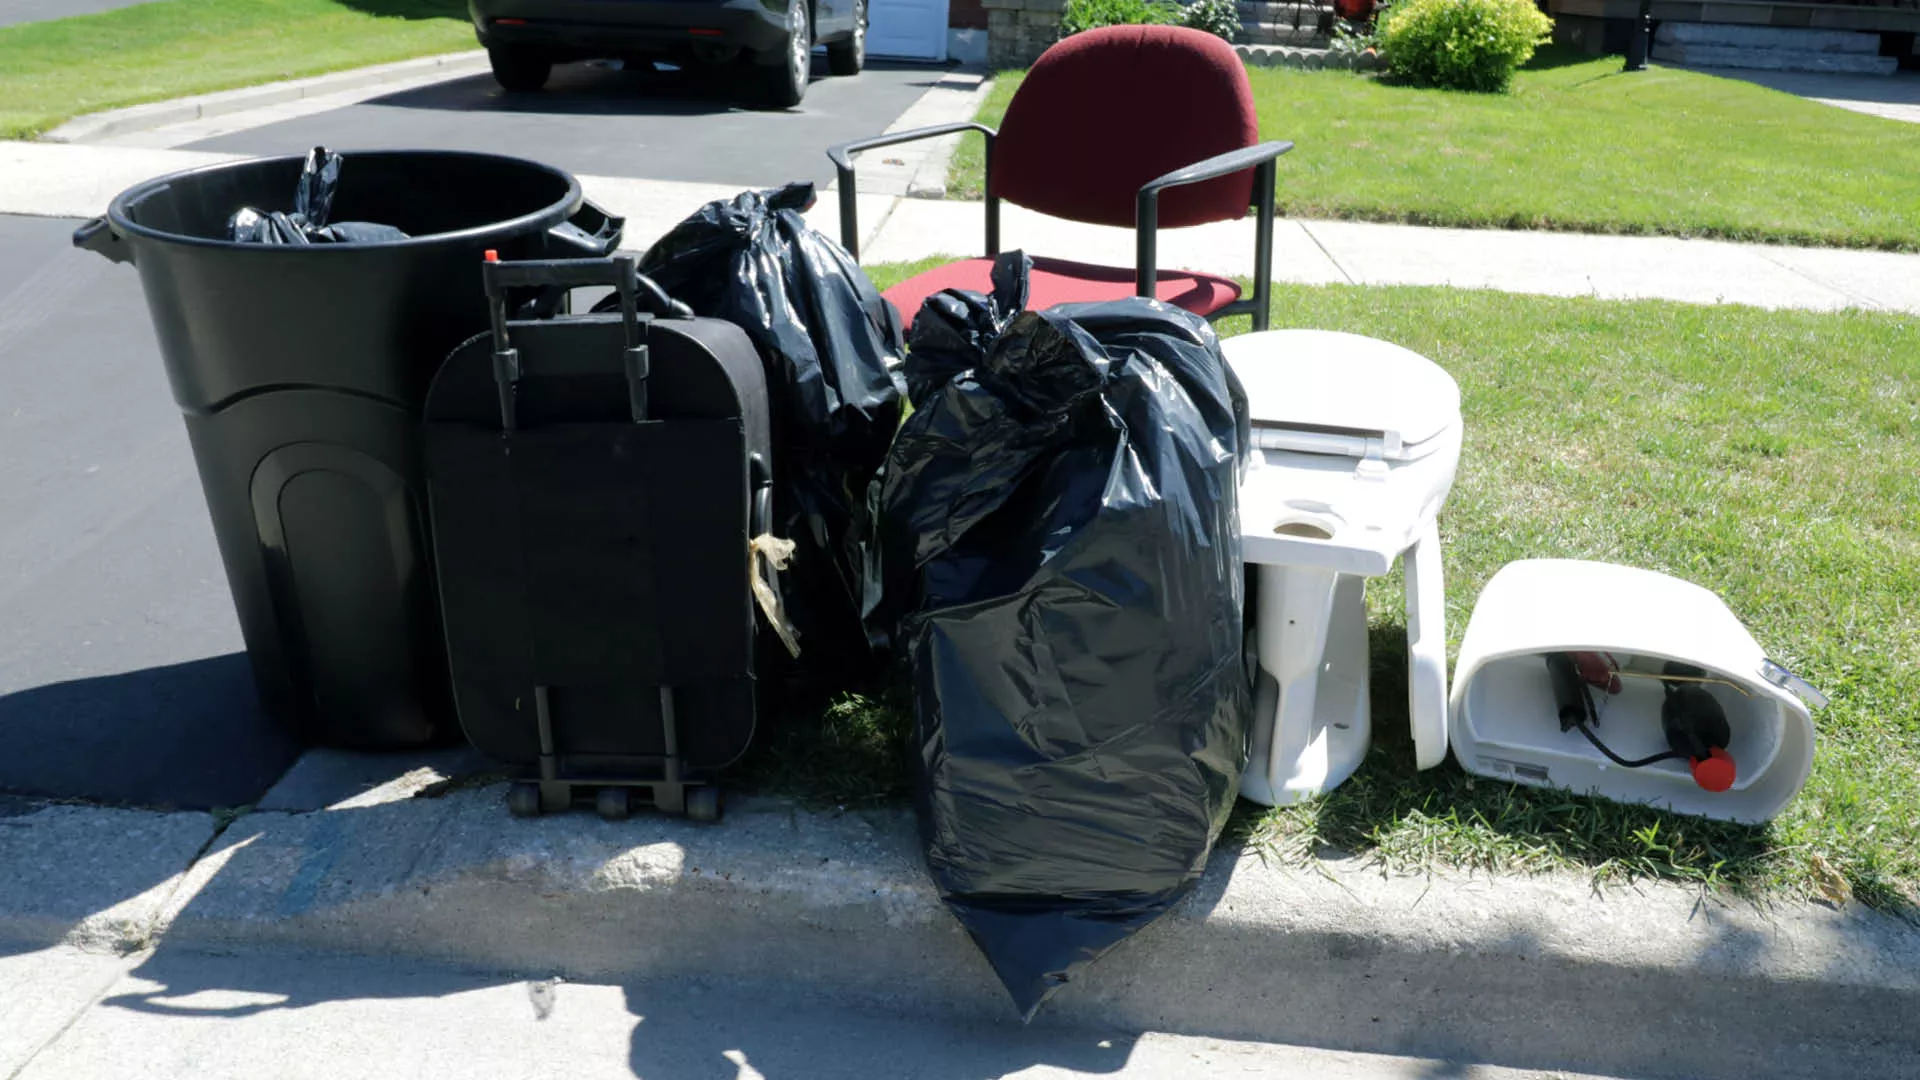 garbage bags, toilet, chair at the curb